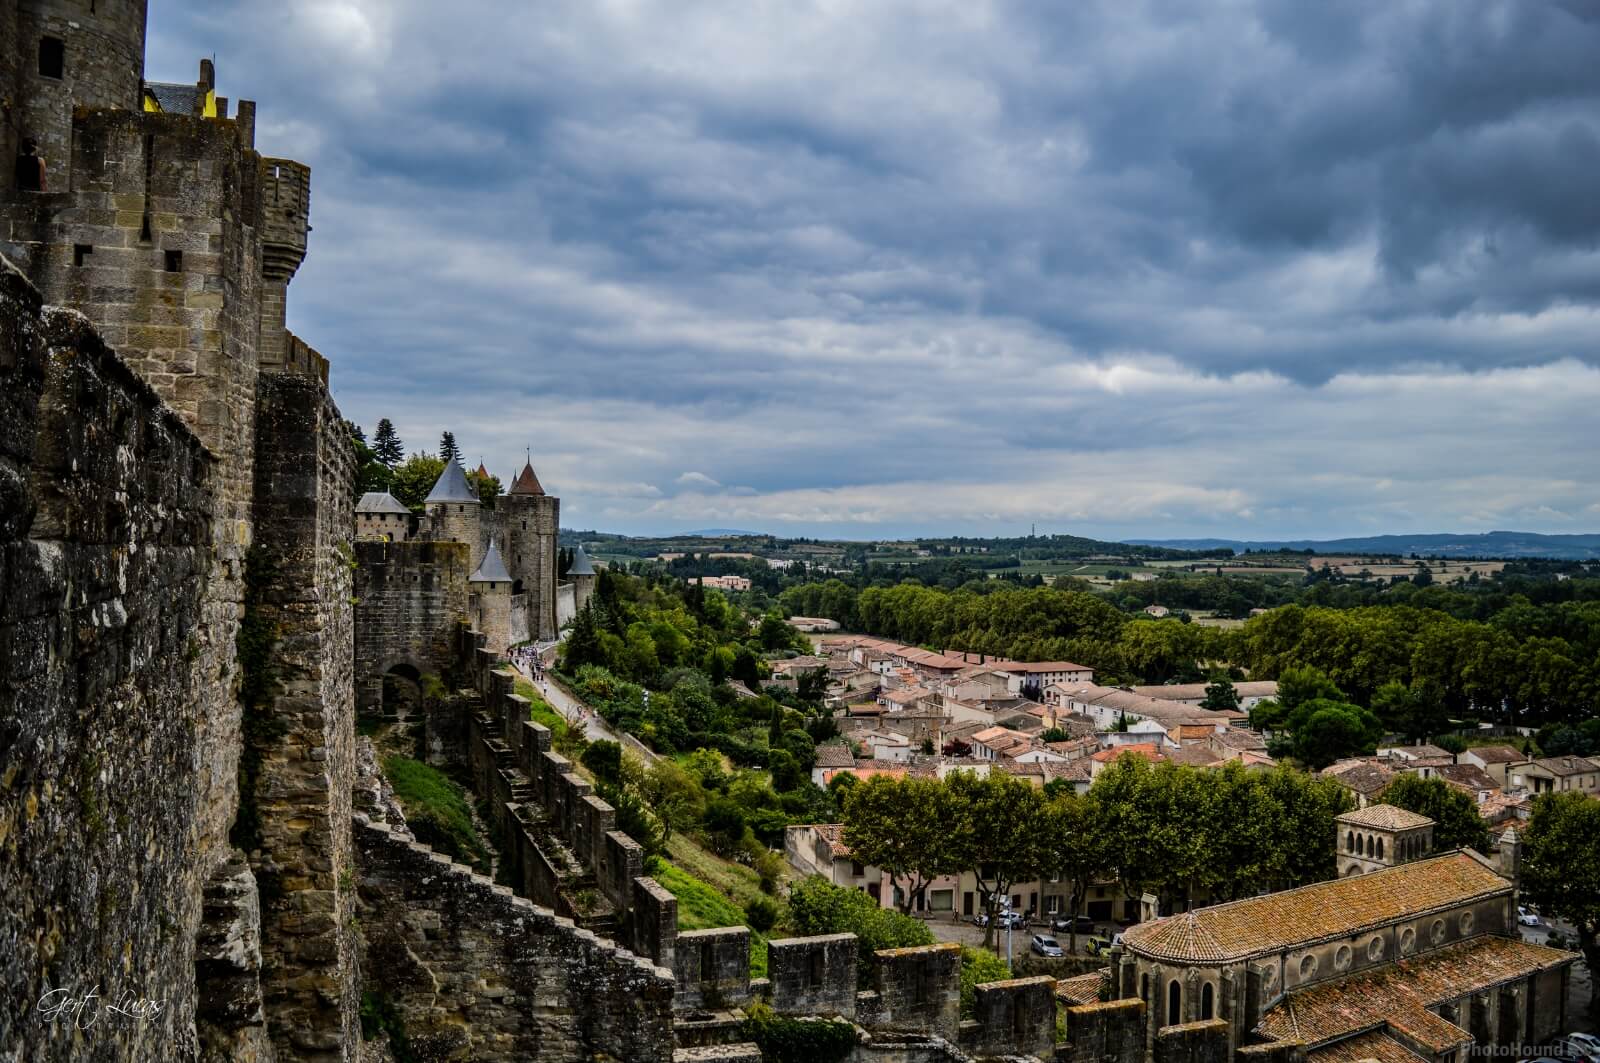 Image of Carcassonne Medieval City by Gert Lucas